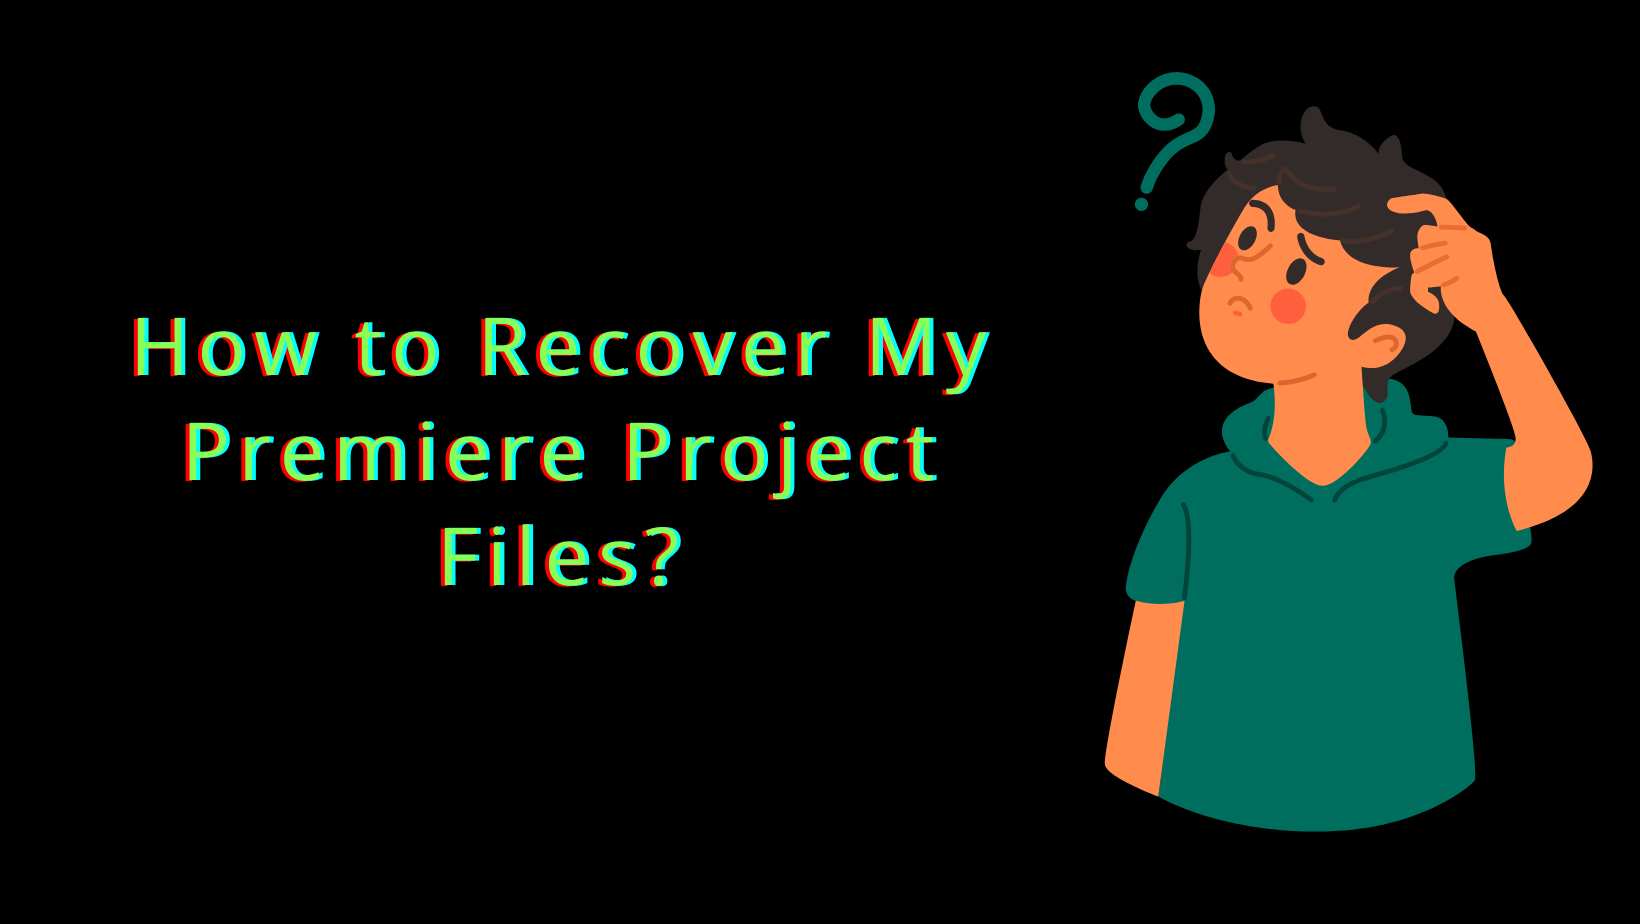 How to Recover My Premiere Project Files